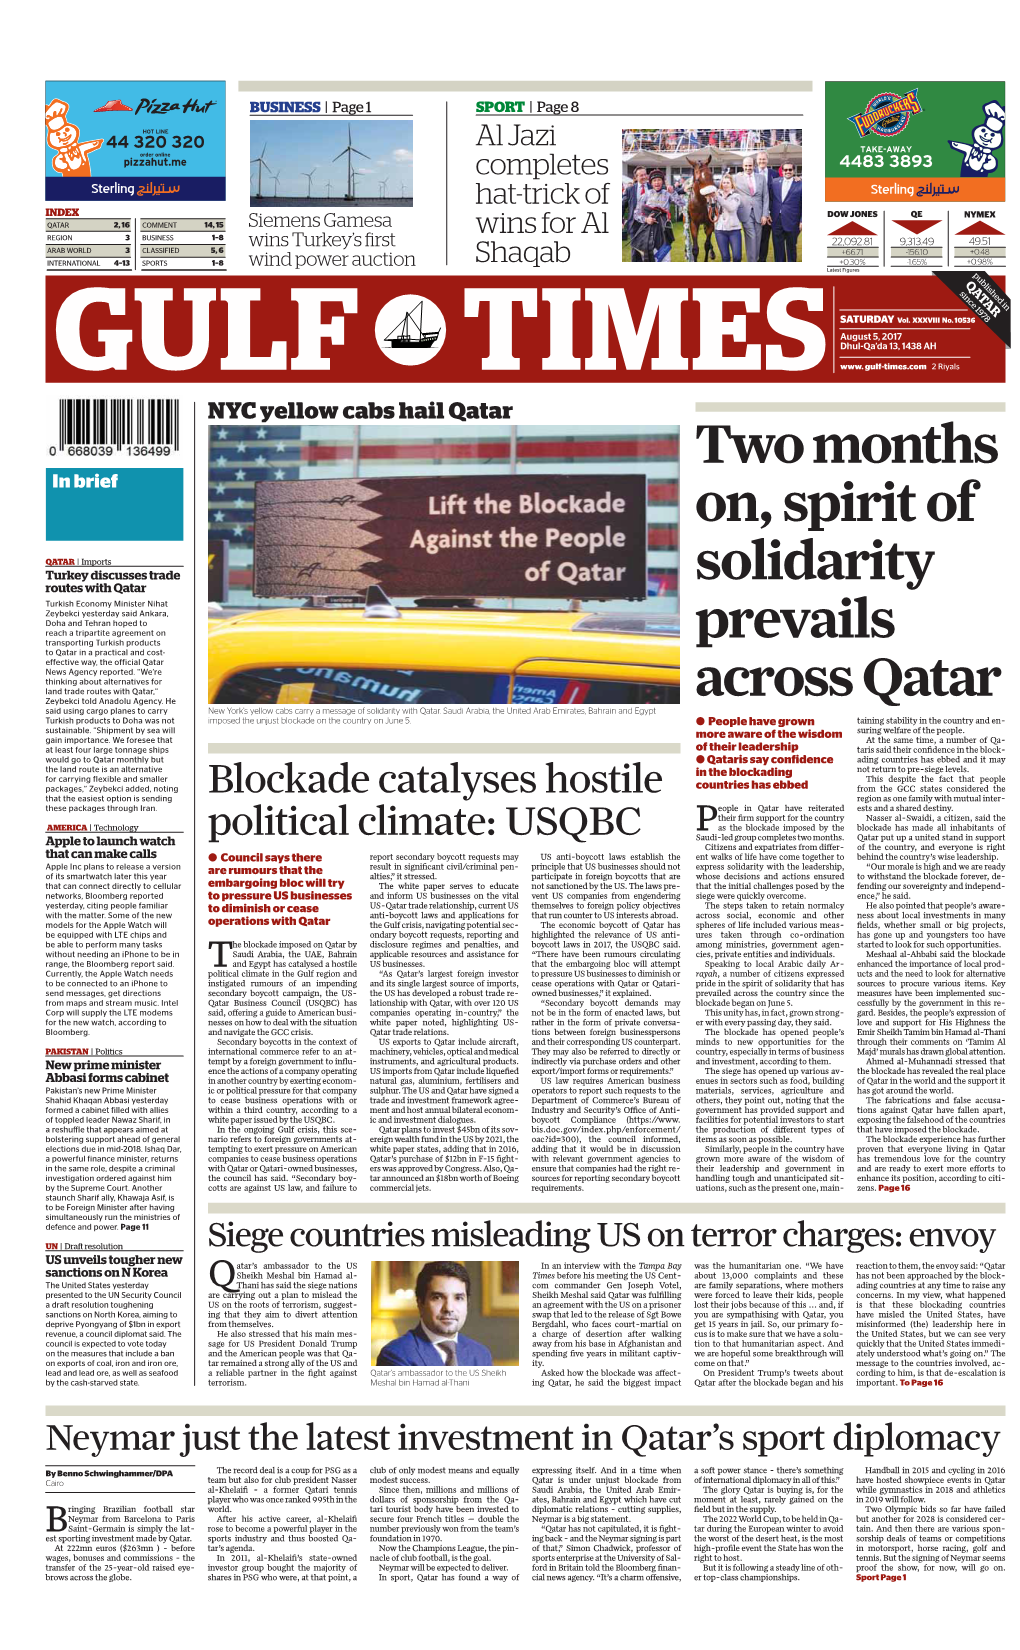 Two Months On, Spirit of Solidarity Prevails Across Qatar